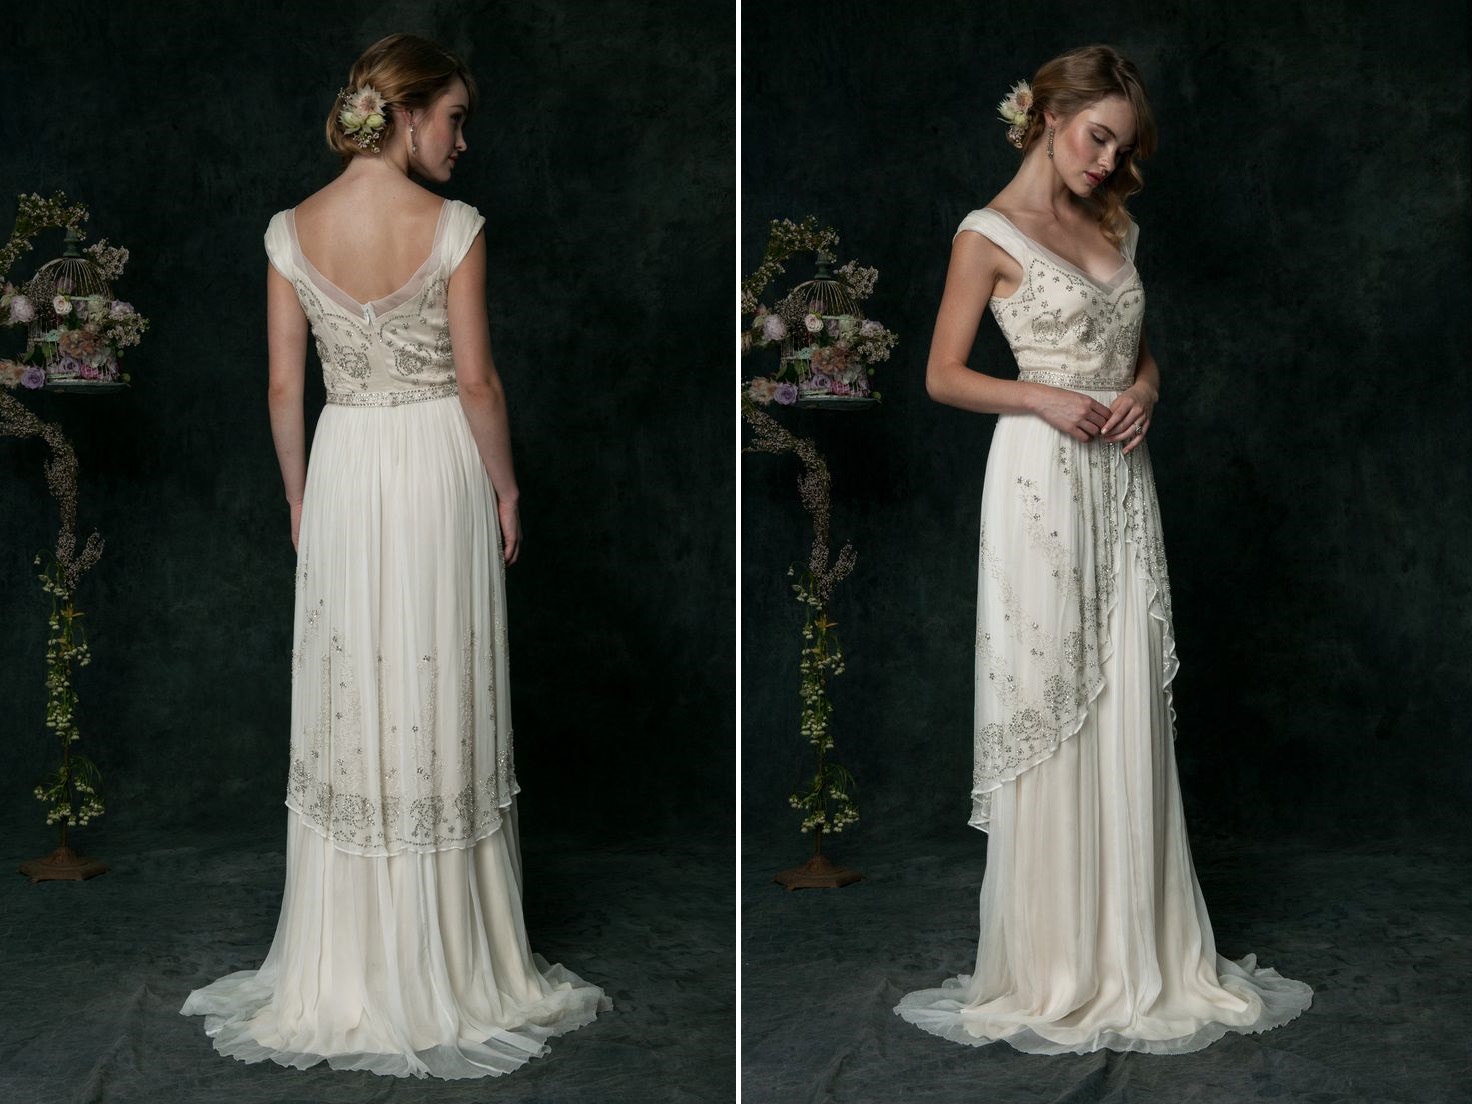 Art Nouveau Inspired Wedding Dress for 2016 from Saja Wedding